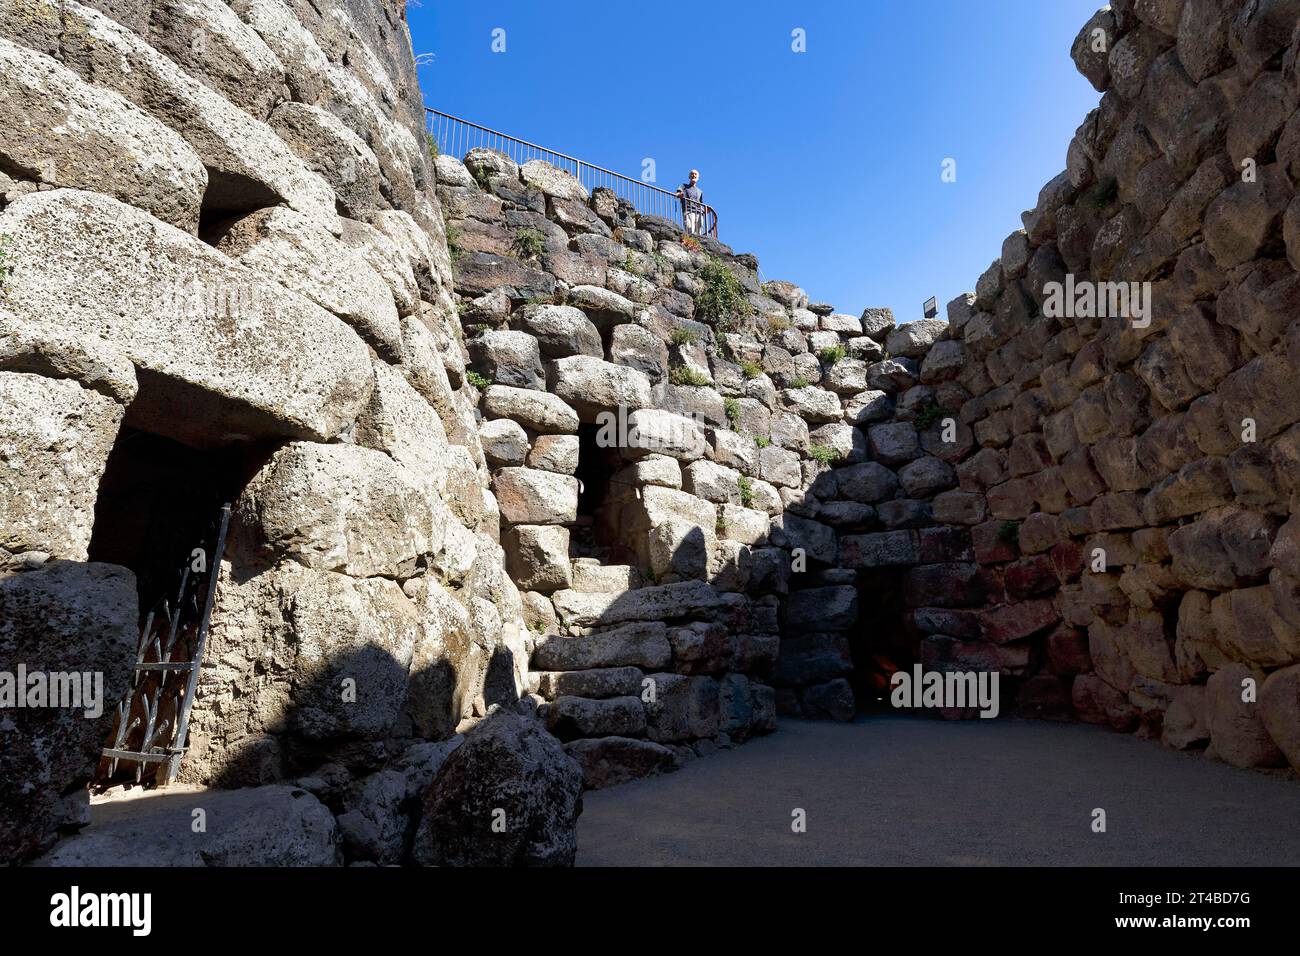 Nuraghe Santu Antine, courtyard at the tower, Bonnanaro culture, megalithic ruin, tourist at the fortress, archaeological site near Torralba Stock Photo